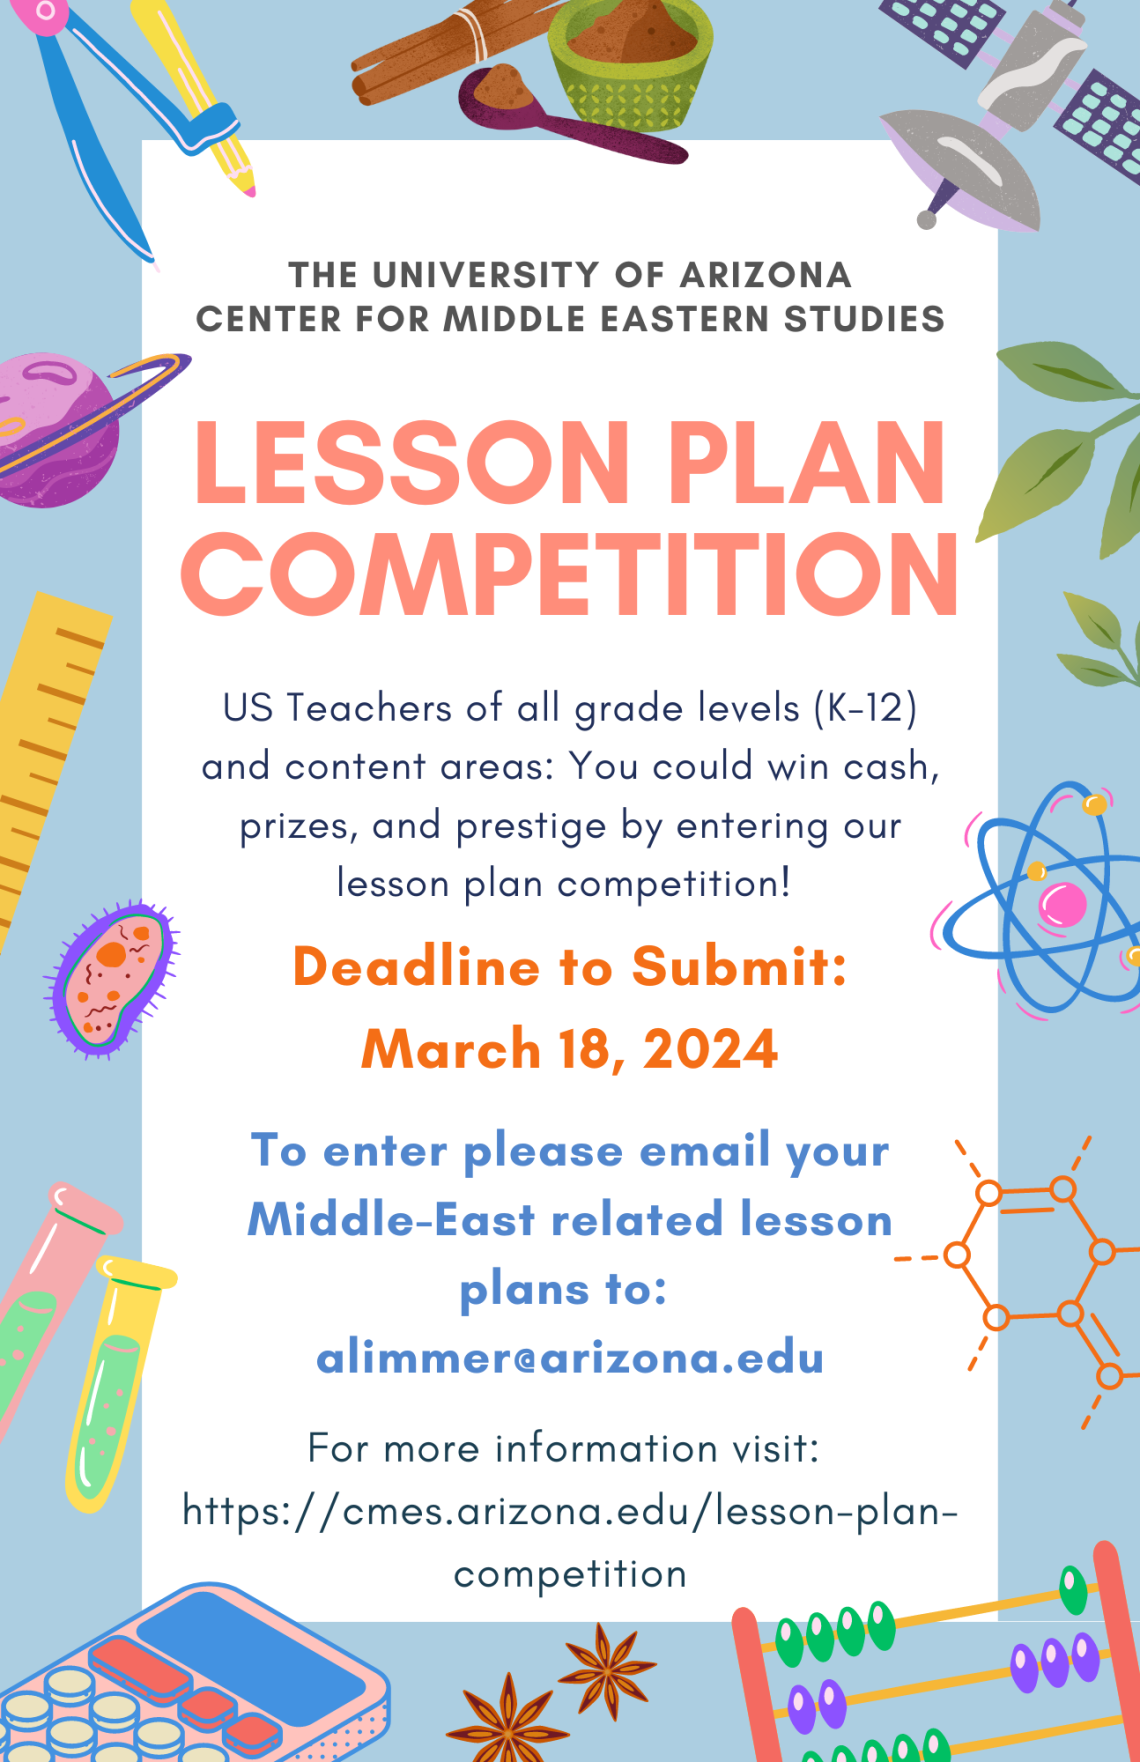 Lesson Plan Competition Flyer: Due date March 18th, email Alimmer@arizona.edu for more information